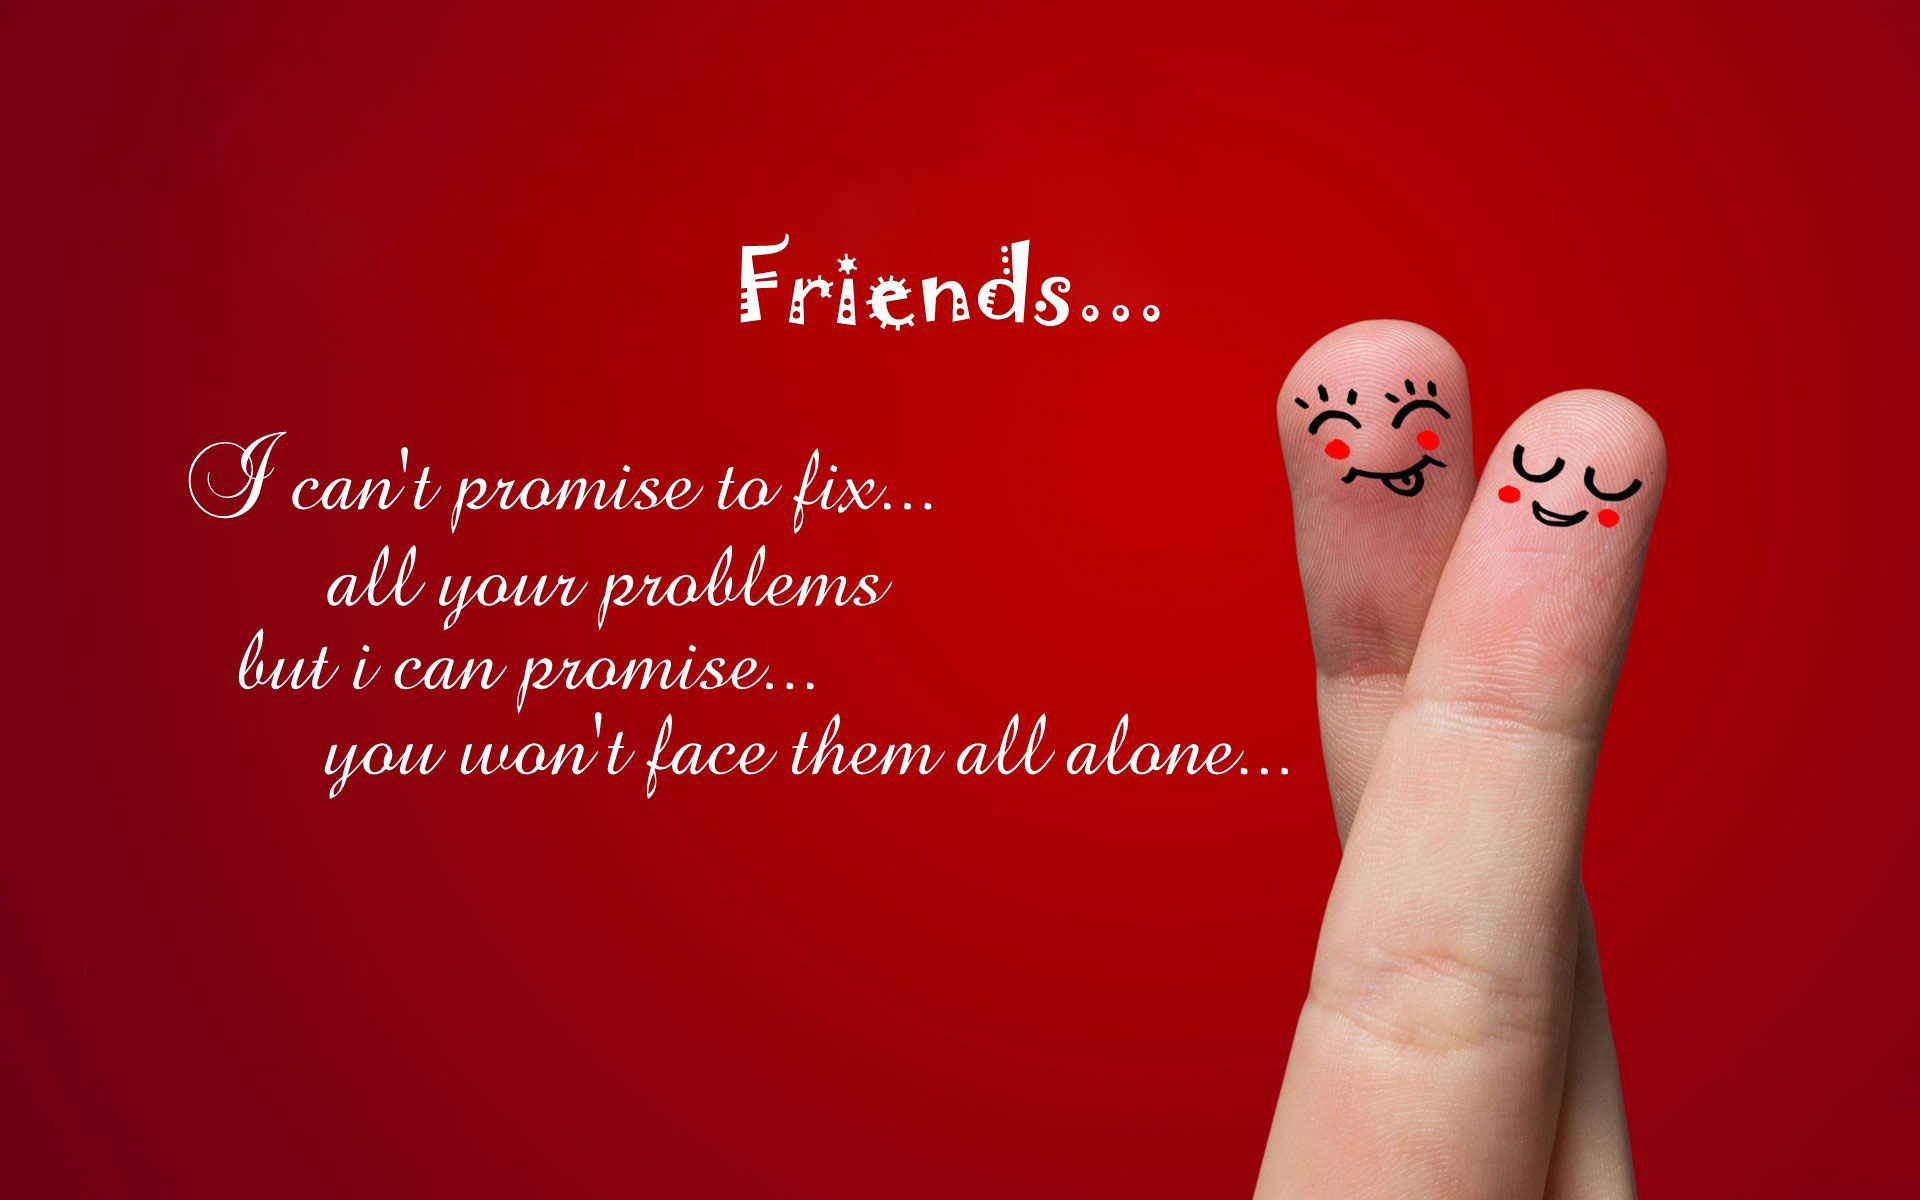 Cute Friendship Quotes With Image Wallpaper